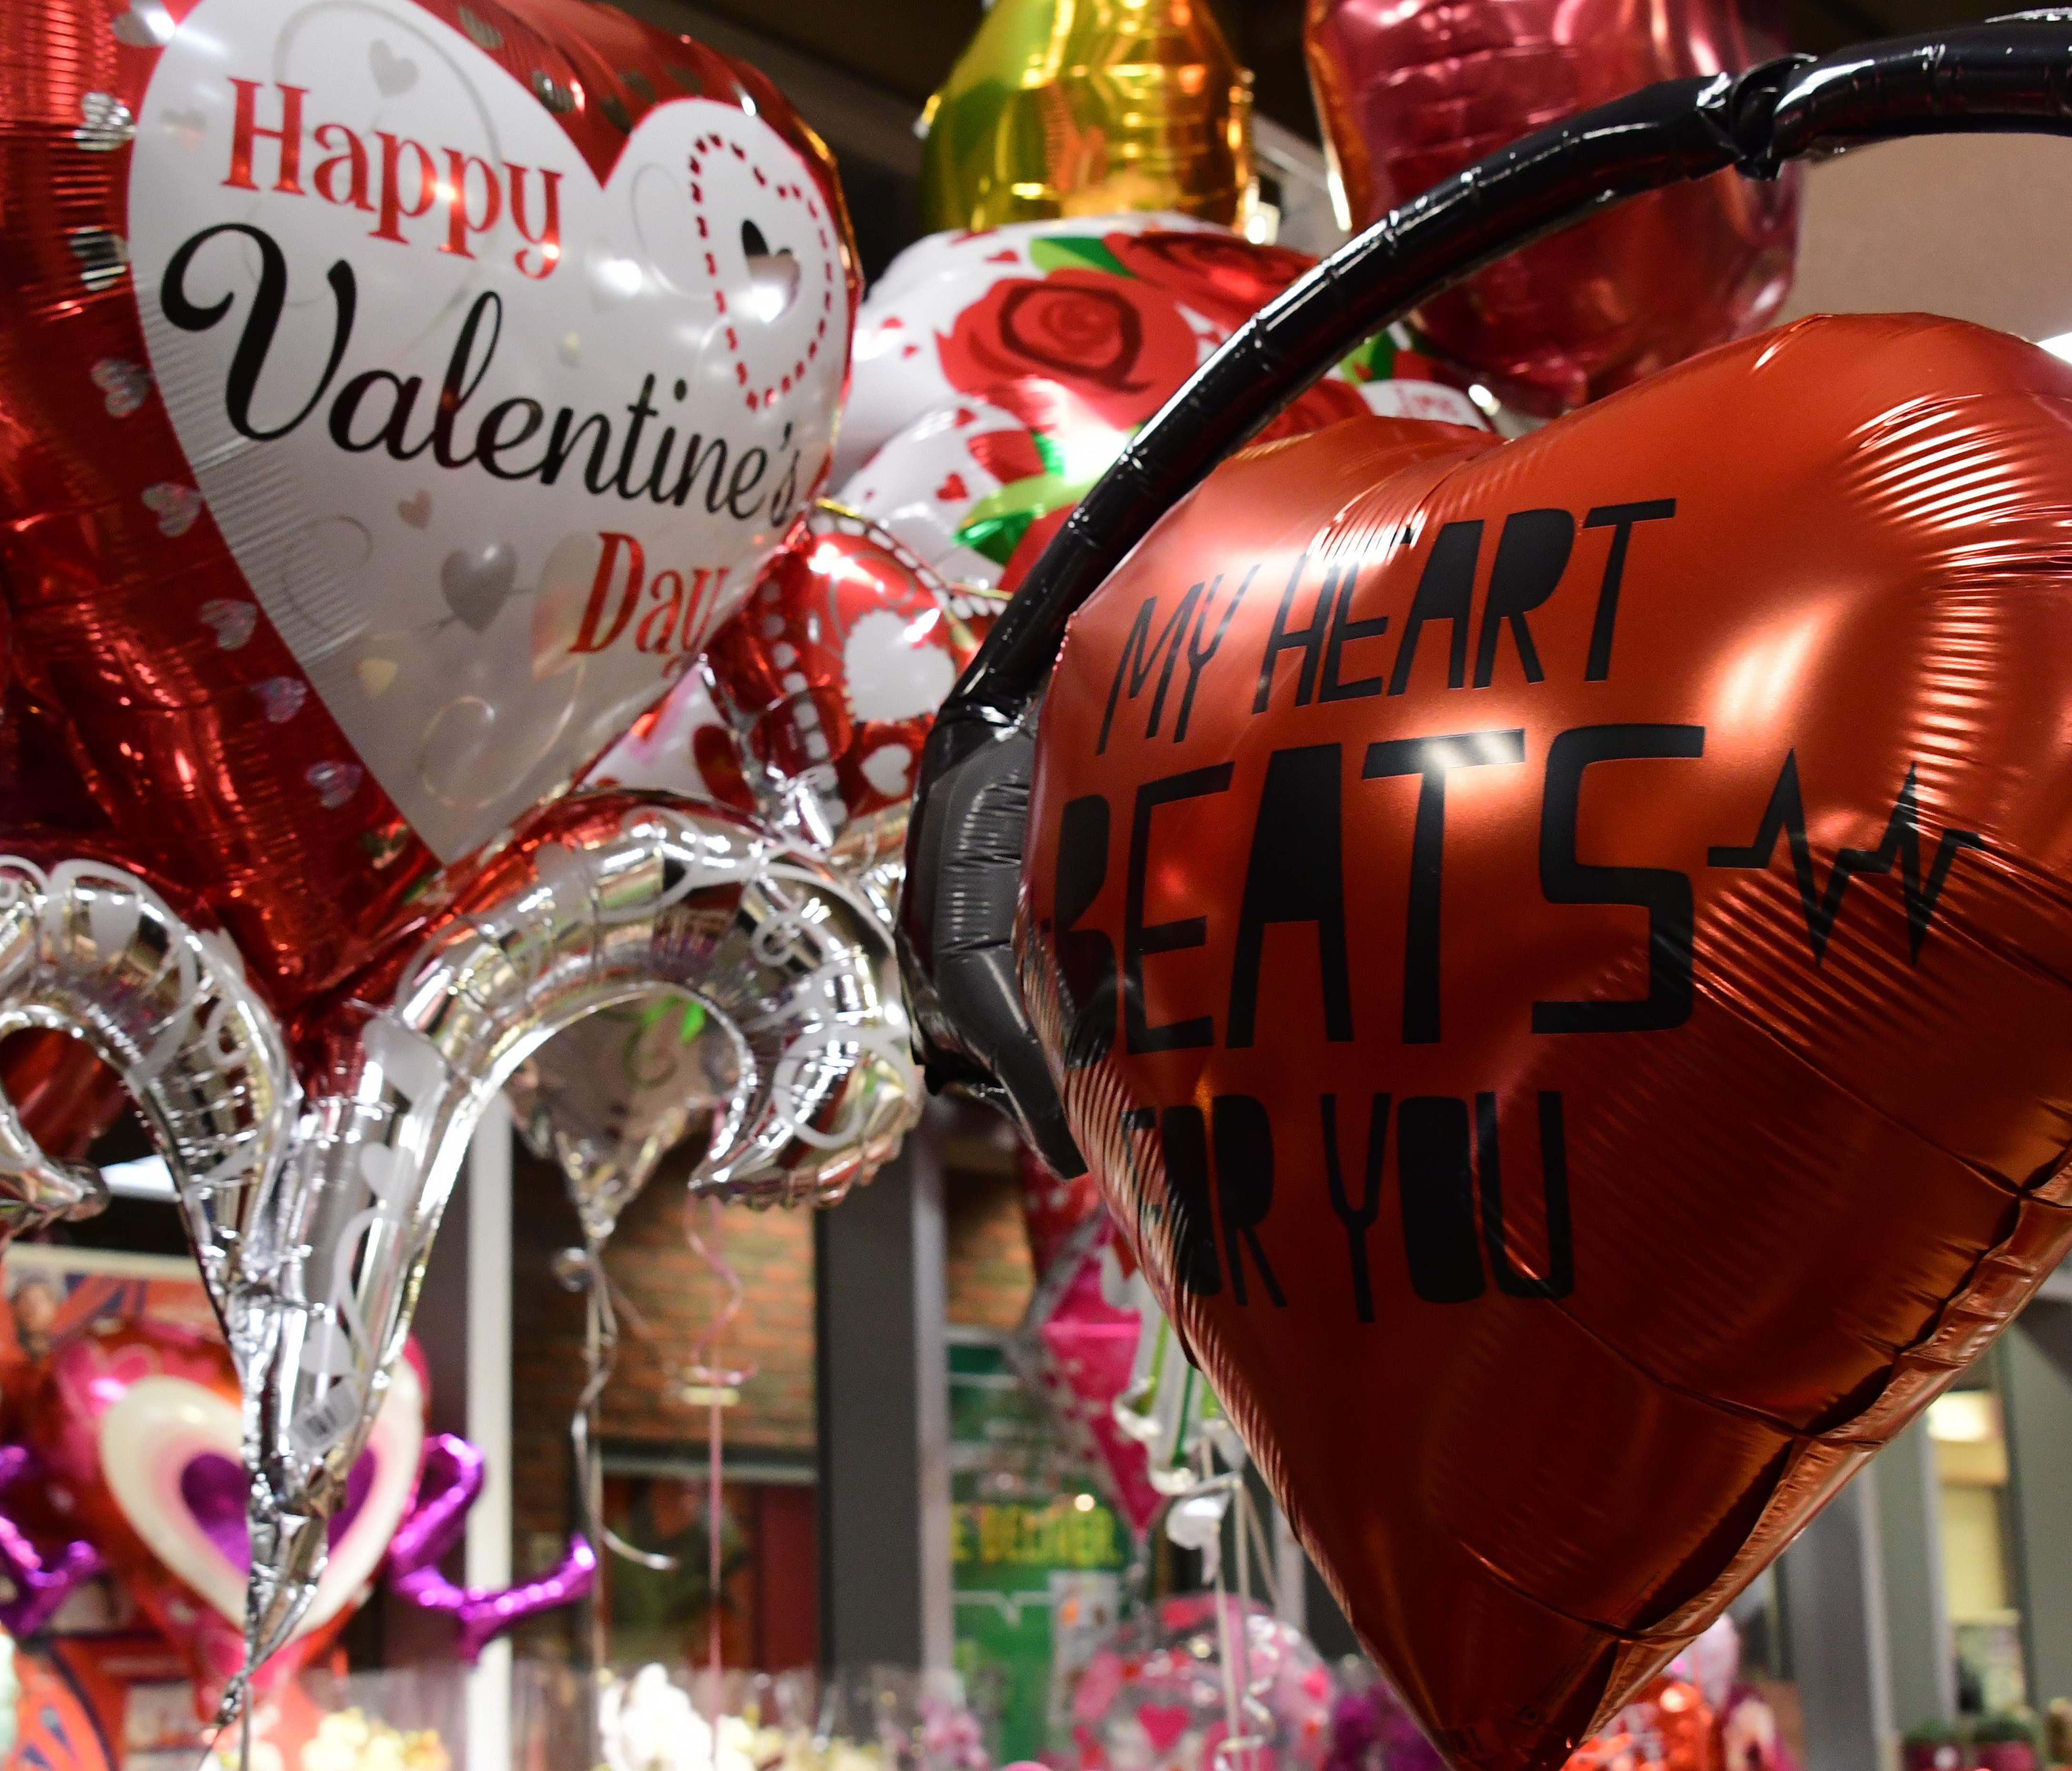 Merchandise for Valentine's Day is on display at a supermarket in Washington D.C.